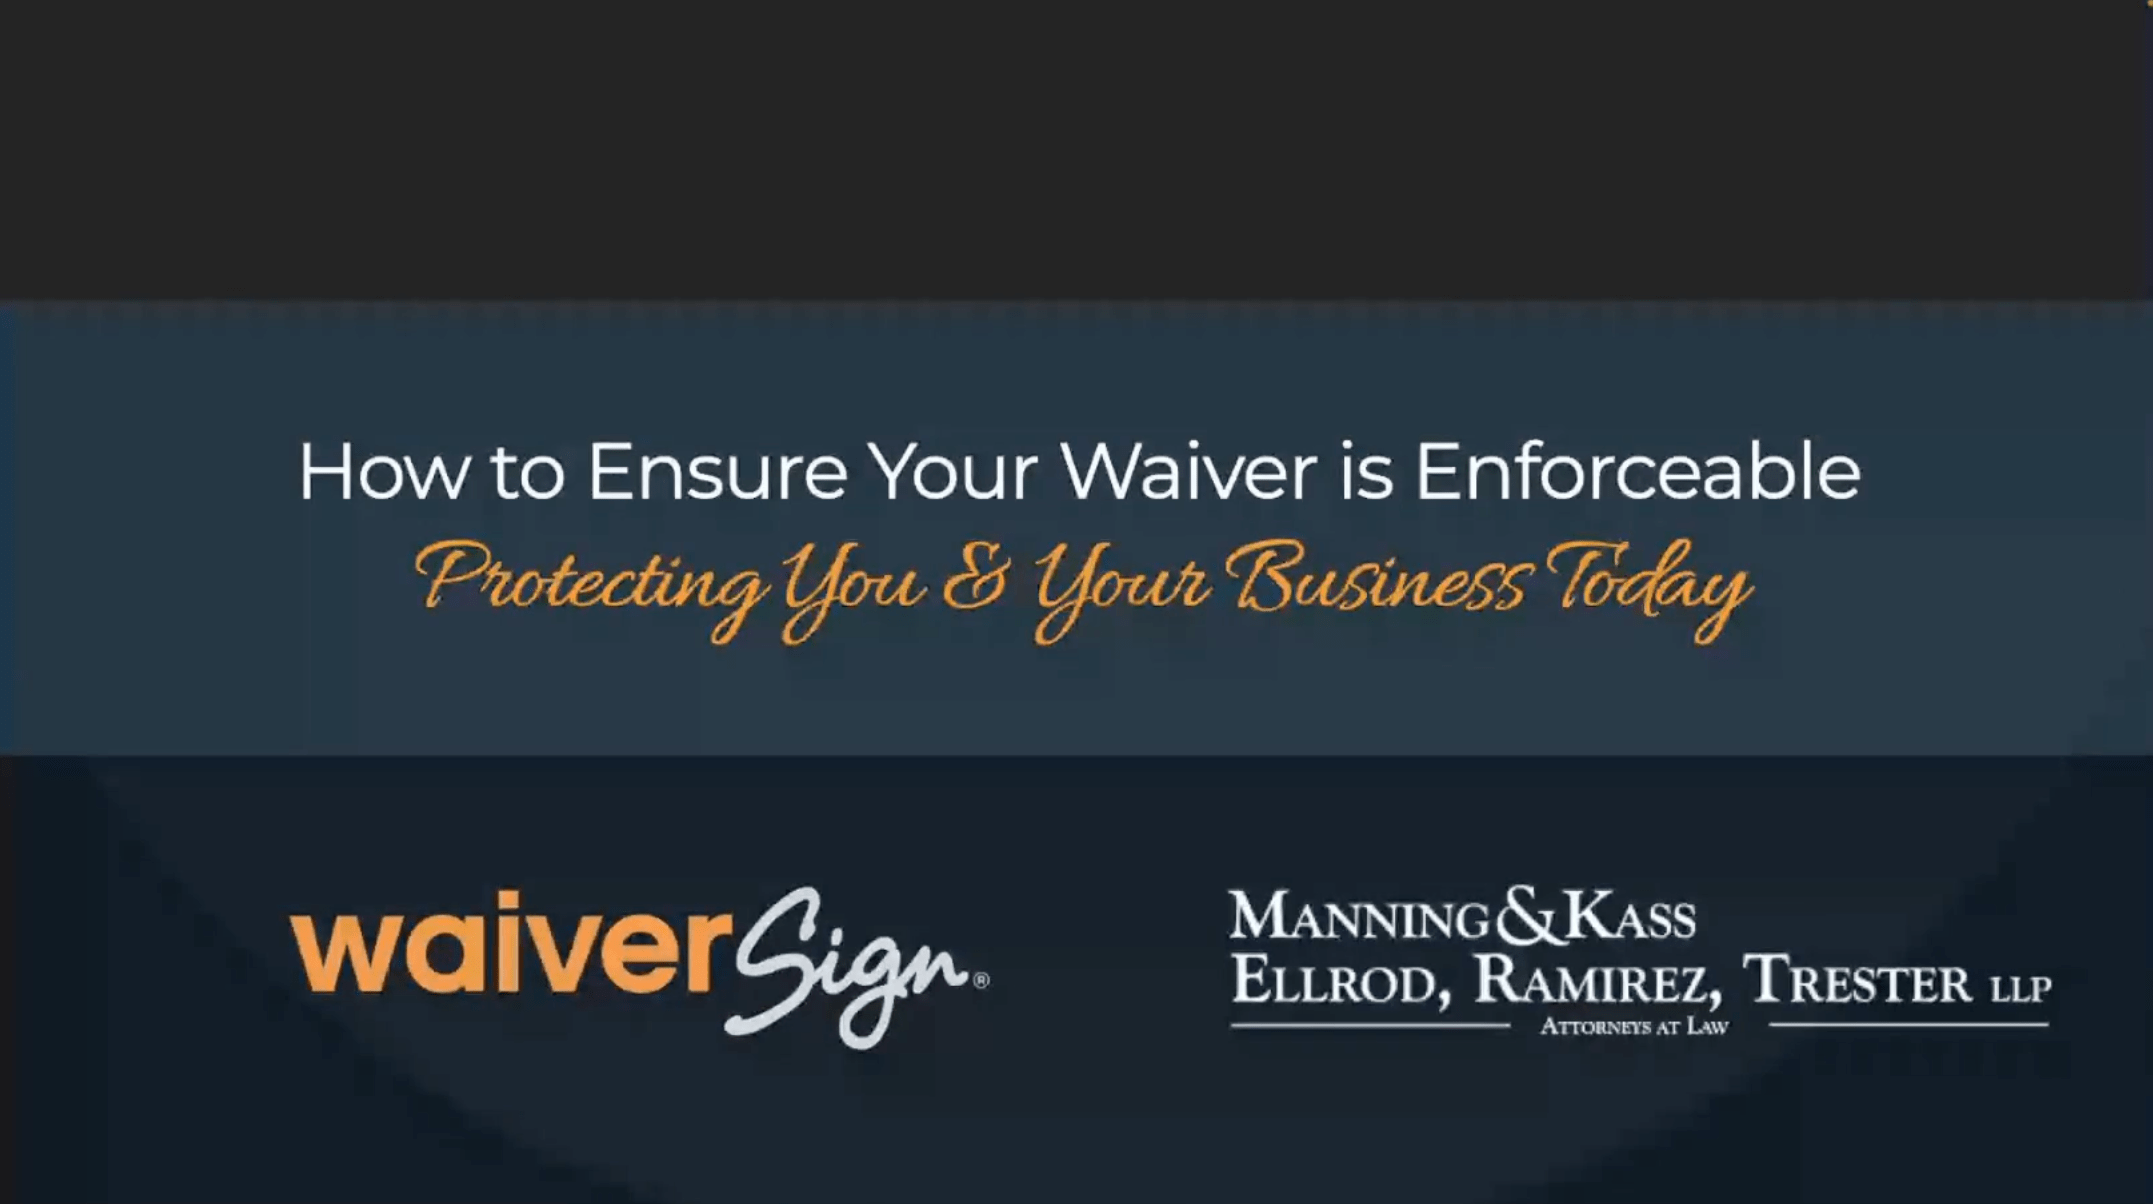 How to Ensure Your Waiver Is Enforceable